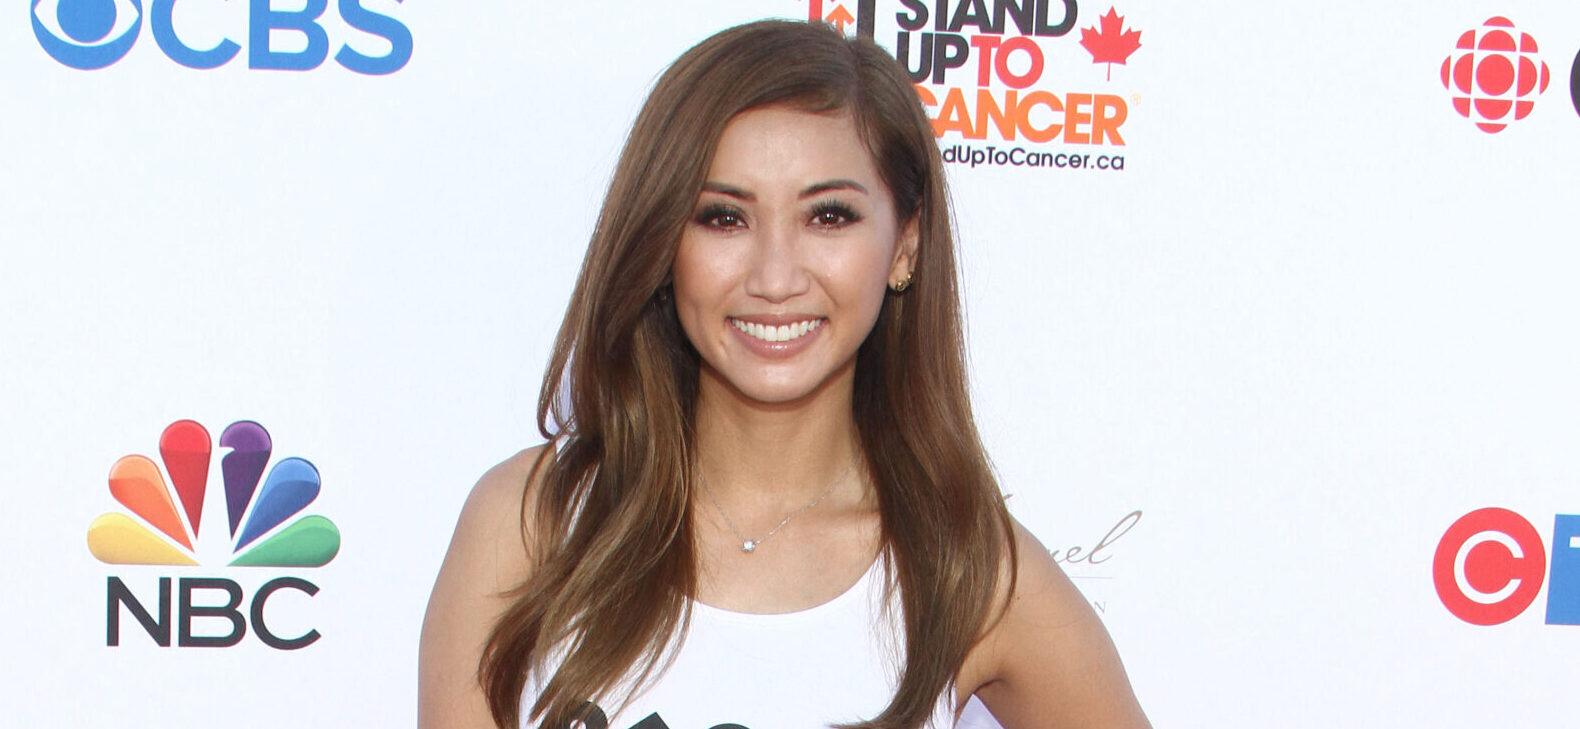 Stand Up To Cancer Benefit 2018 at The Barker Hangar in Santa Monica, California on 9/7/18. 07 Sep 2018 Pictured: Brenda Song. Photo credit: River / MEGA TheMegaAgency.com +1 888 505 6342 (Mega Agency TagID: MEGA271977_027.jpg) [Photo via Mega Agency]